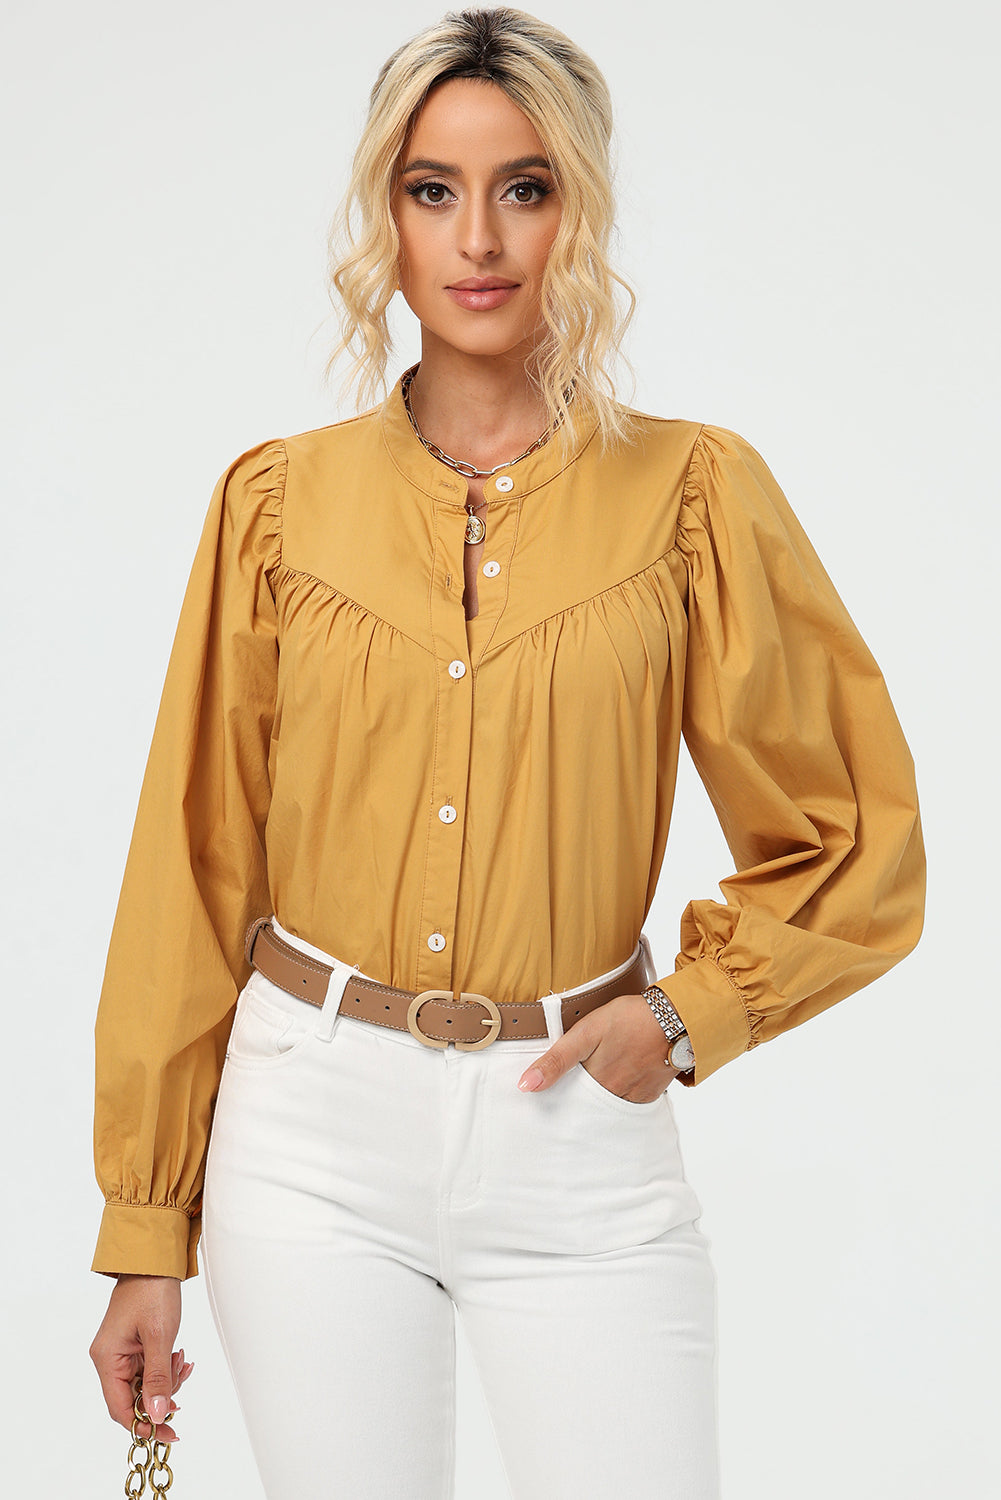 Ruched Button Up Long Sleeve Shirt Gold